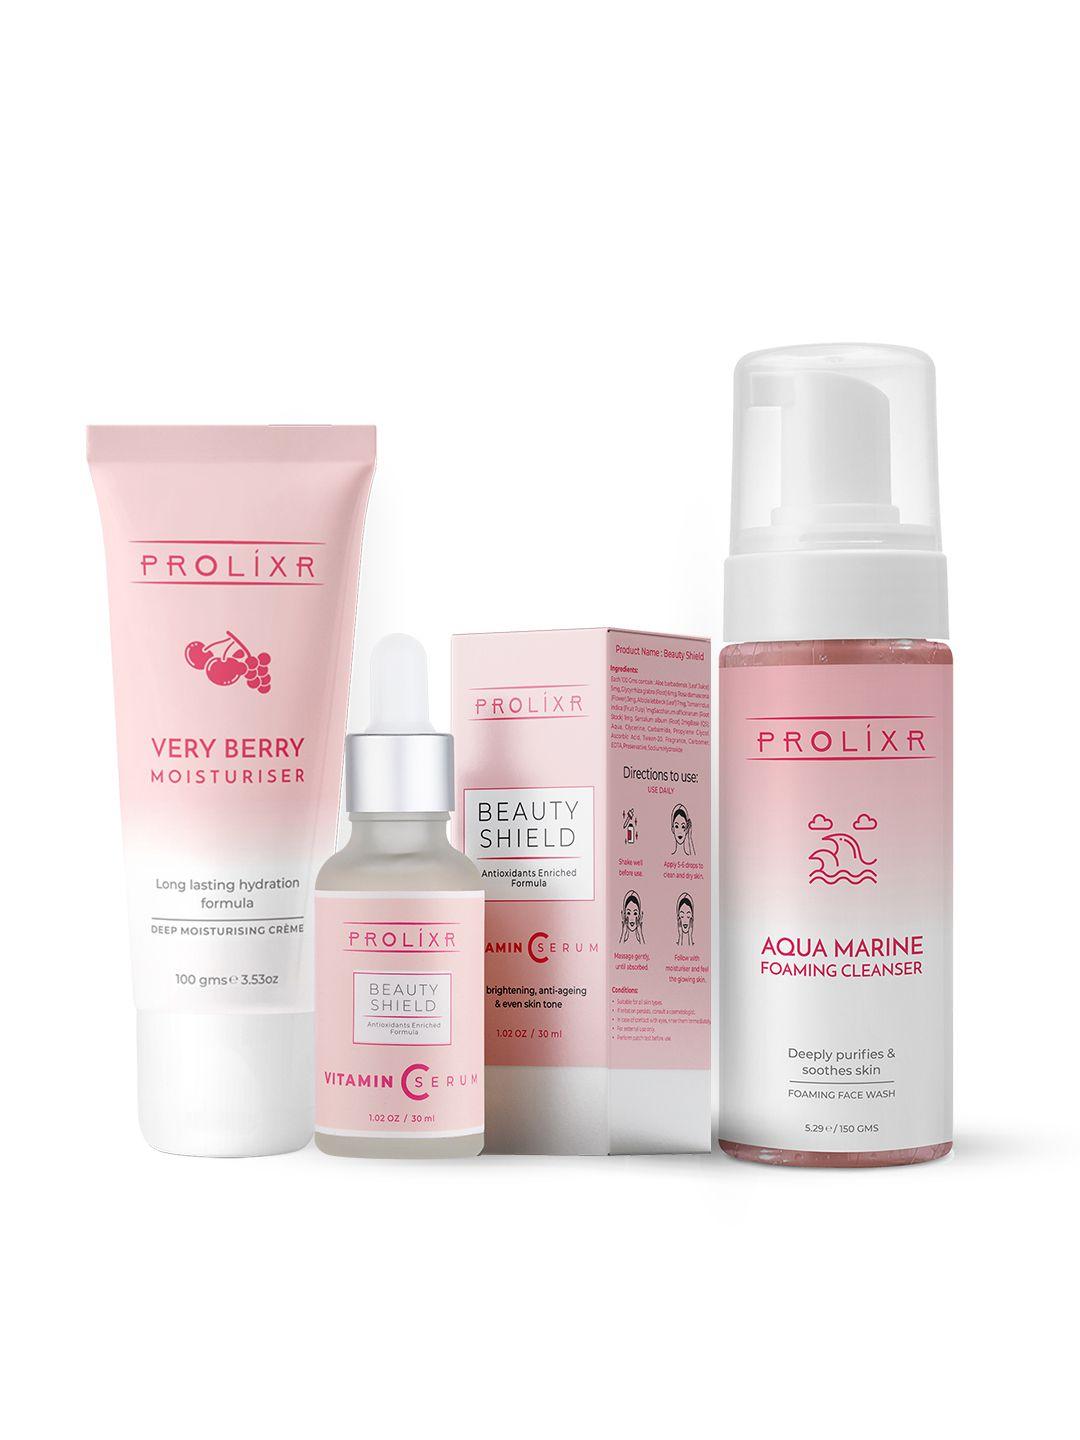 prolixr daily essentials kit to nourish & hydrate for all skin types-280 ml